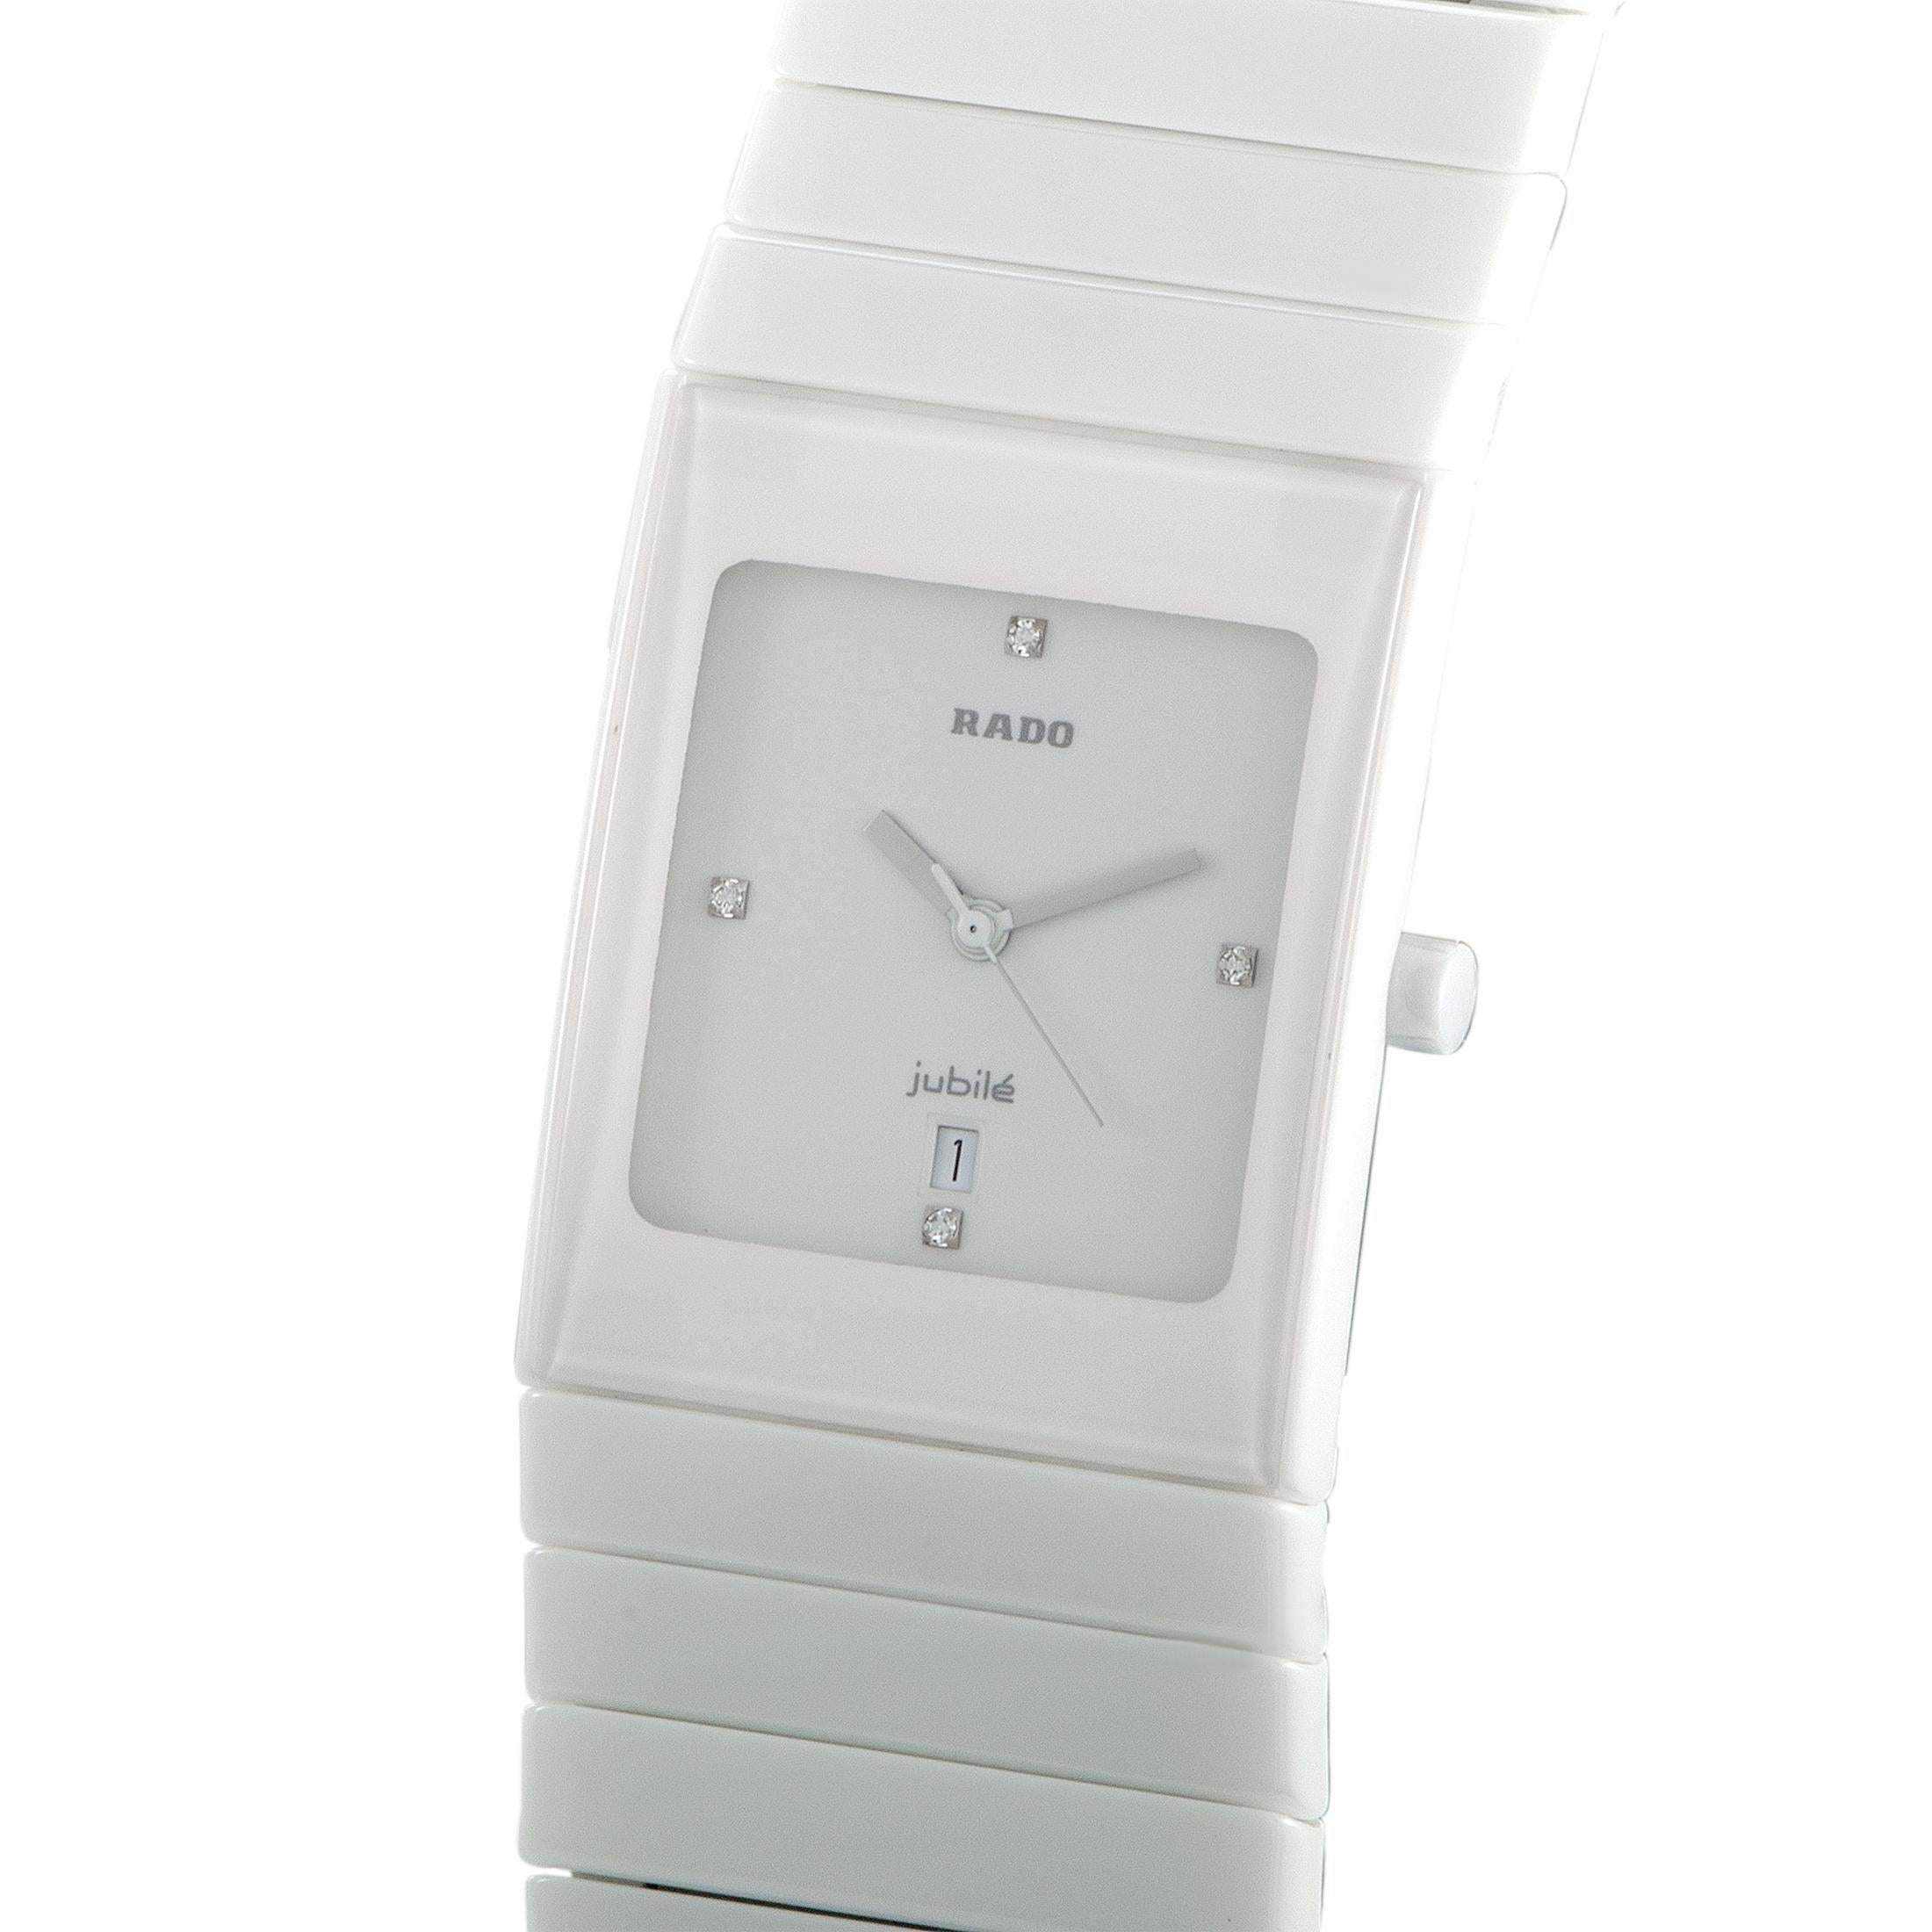 The Rado Ceramica, reference number R21711702, is presented within the exquisite “Ceramica” collection.

The watch boasts a white ceramic case that is mounted onto a matching white ceramic bracelet fitted with a deployment clasp. The case is